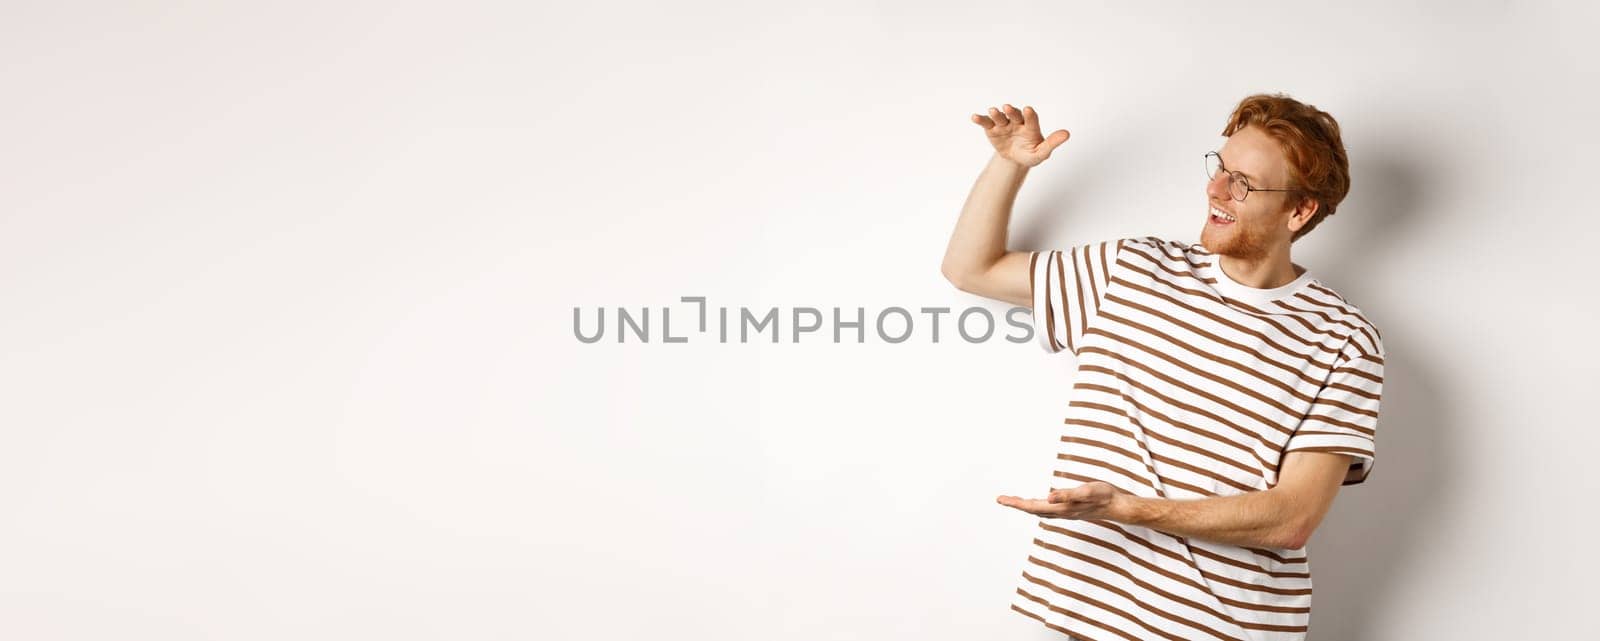 Happy and satisfied caucasian redhead man introduce something big, showing large product and smiling pleased, white background.